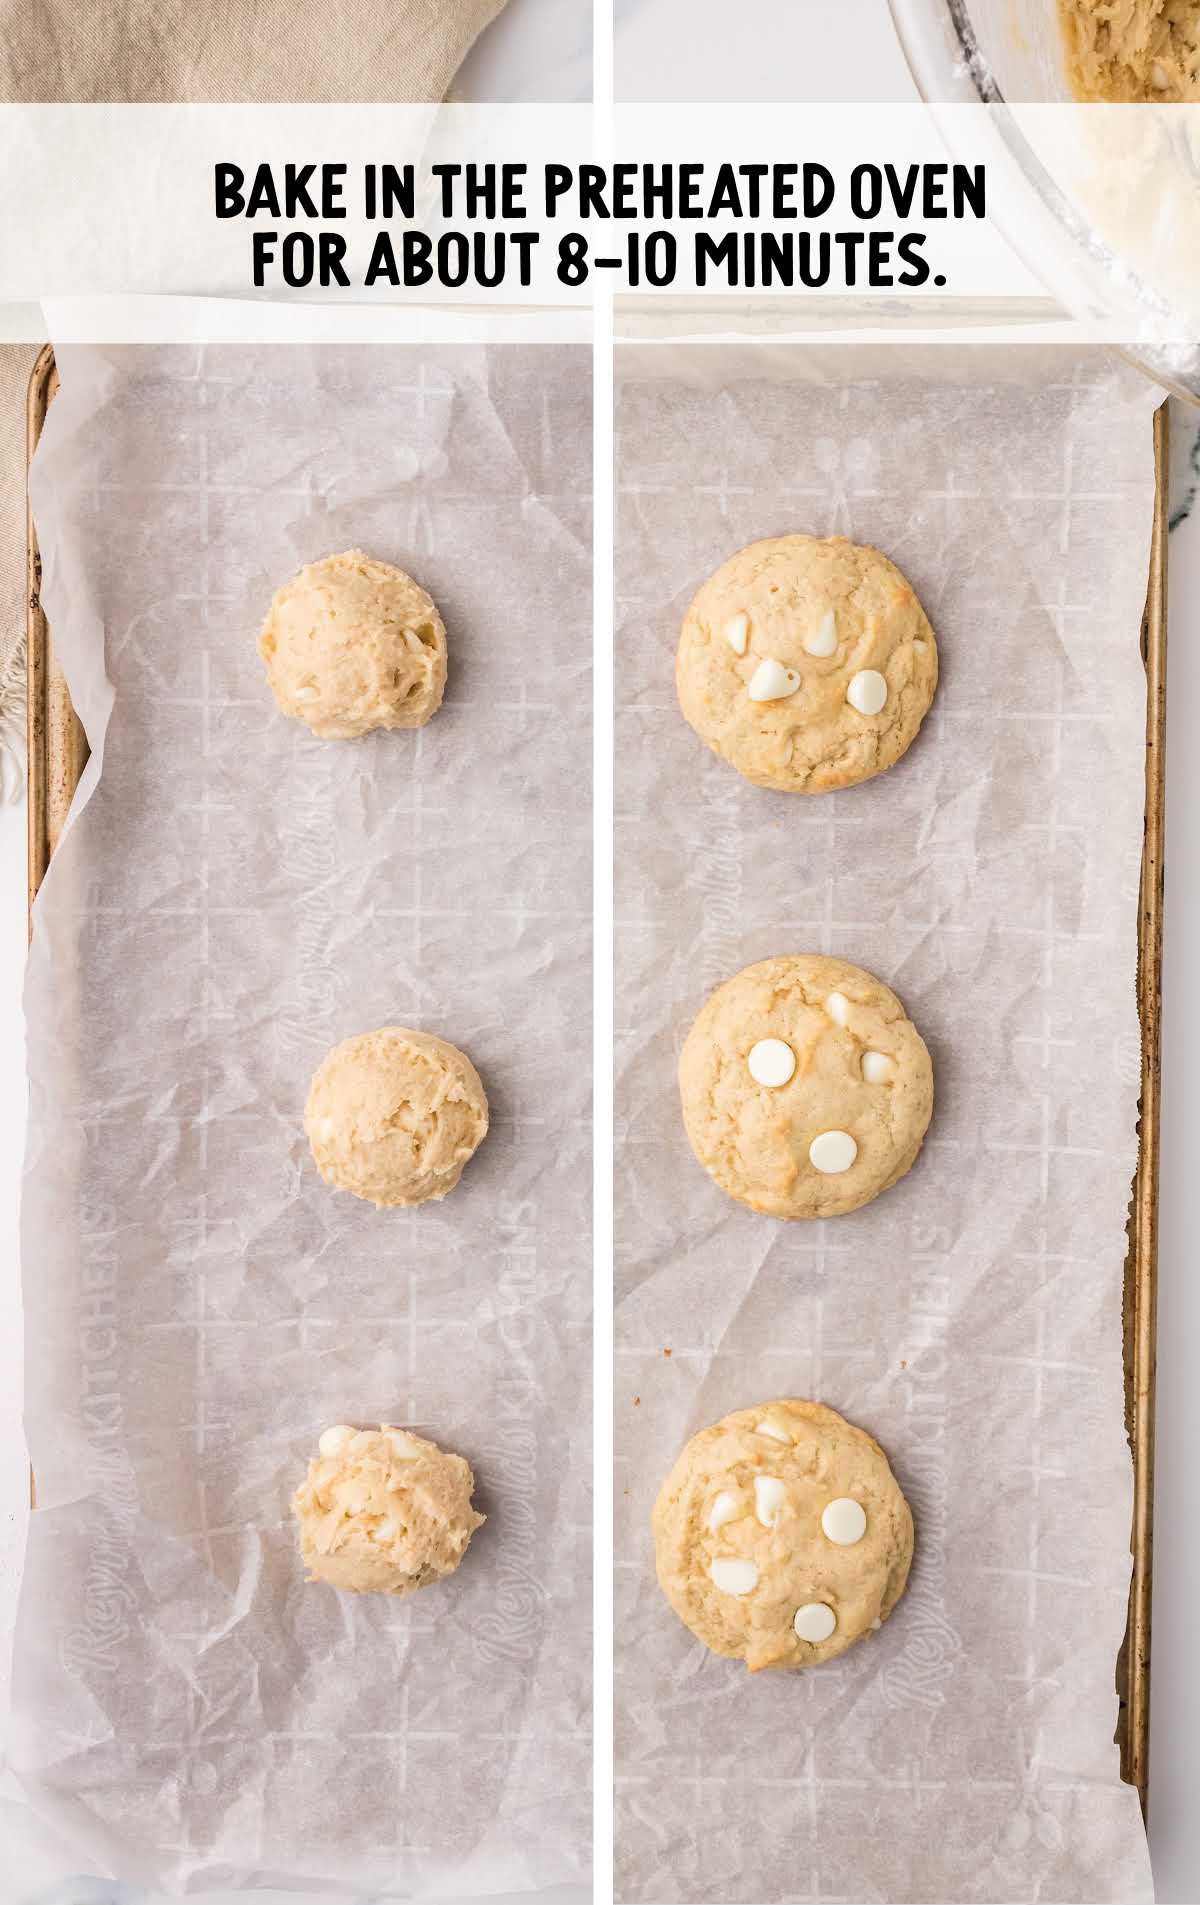 White Chocolate Chip Cookies dough placed on a baking sheet then baked